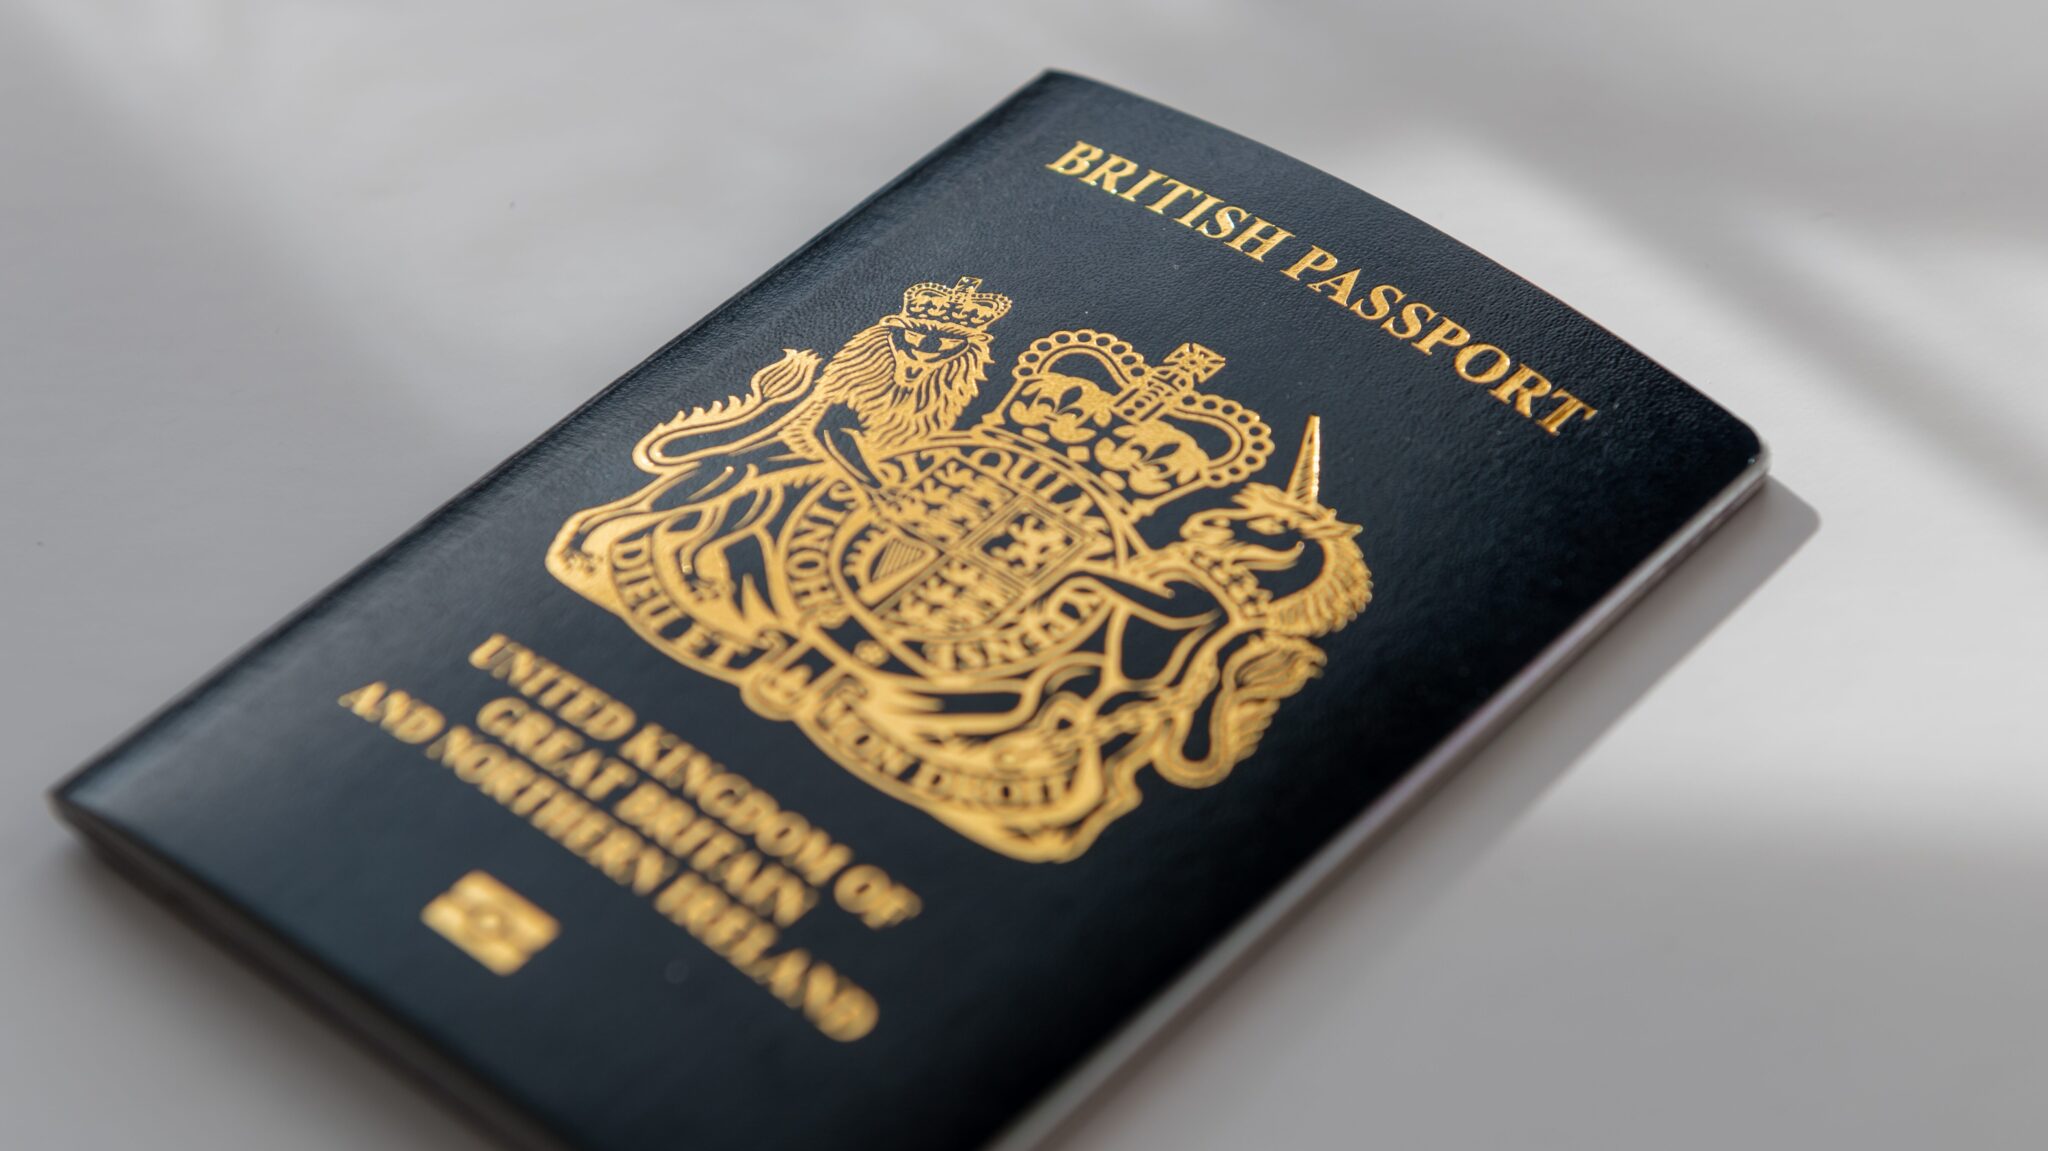 New Nationality Bill introduced to protect British citizenship of children of EU citizens